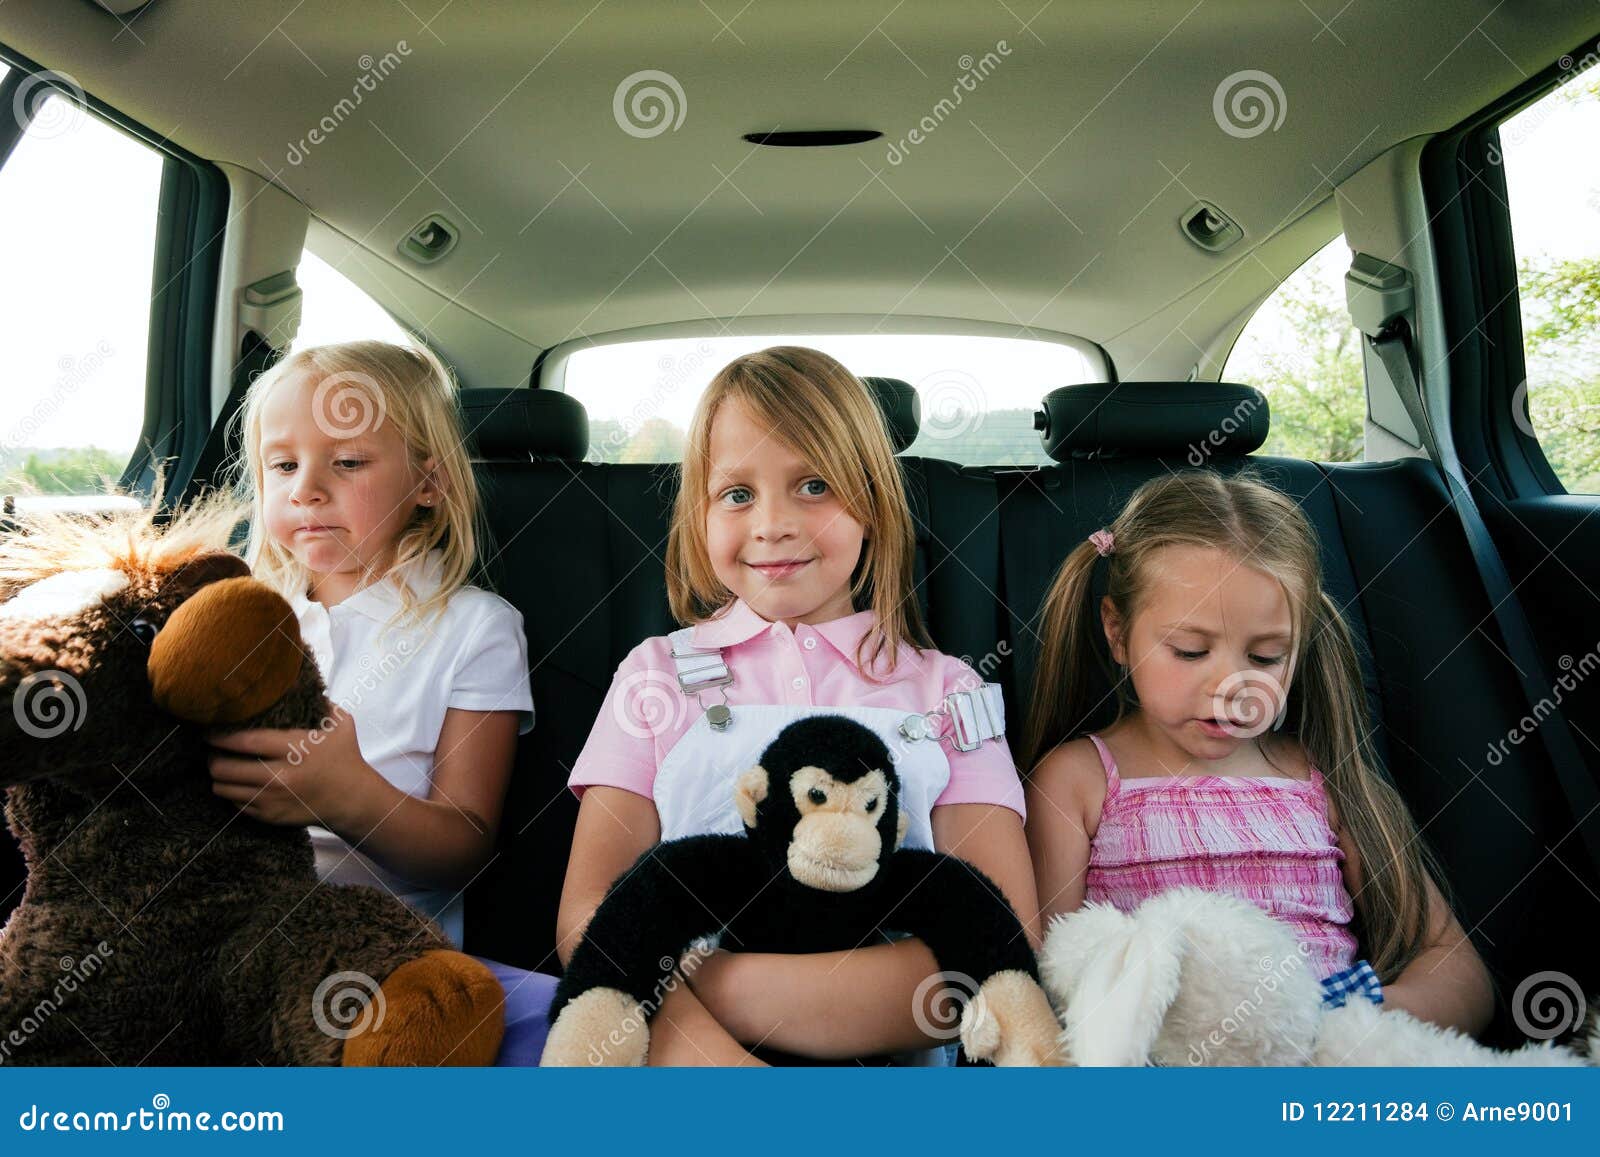 family travelling by car